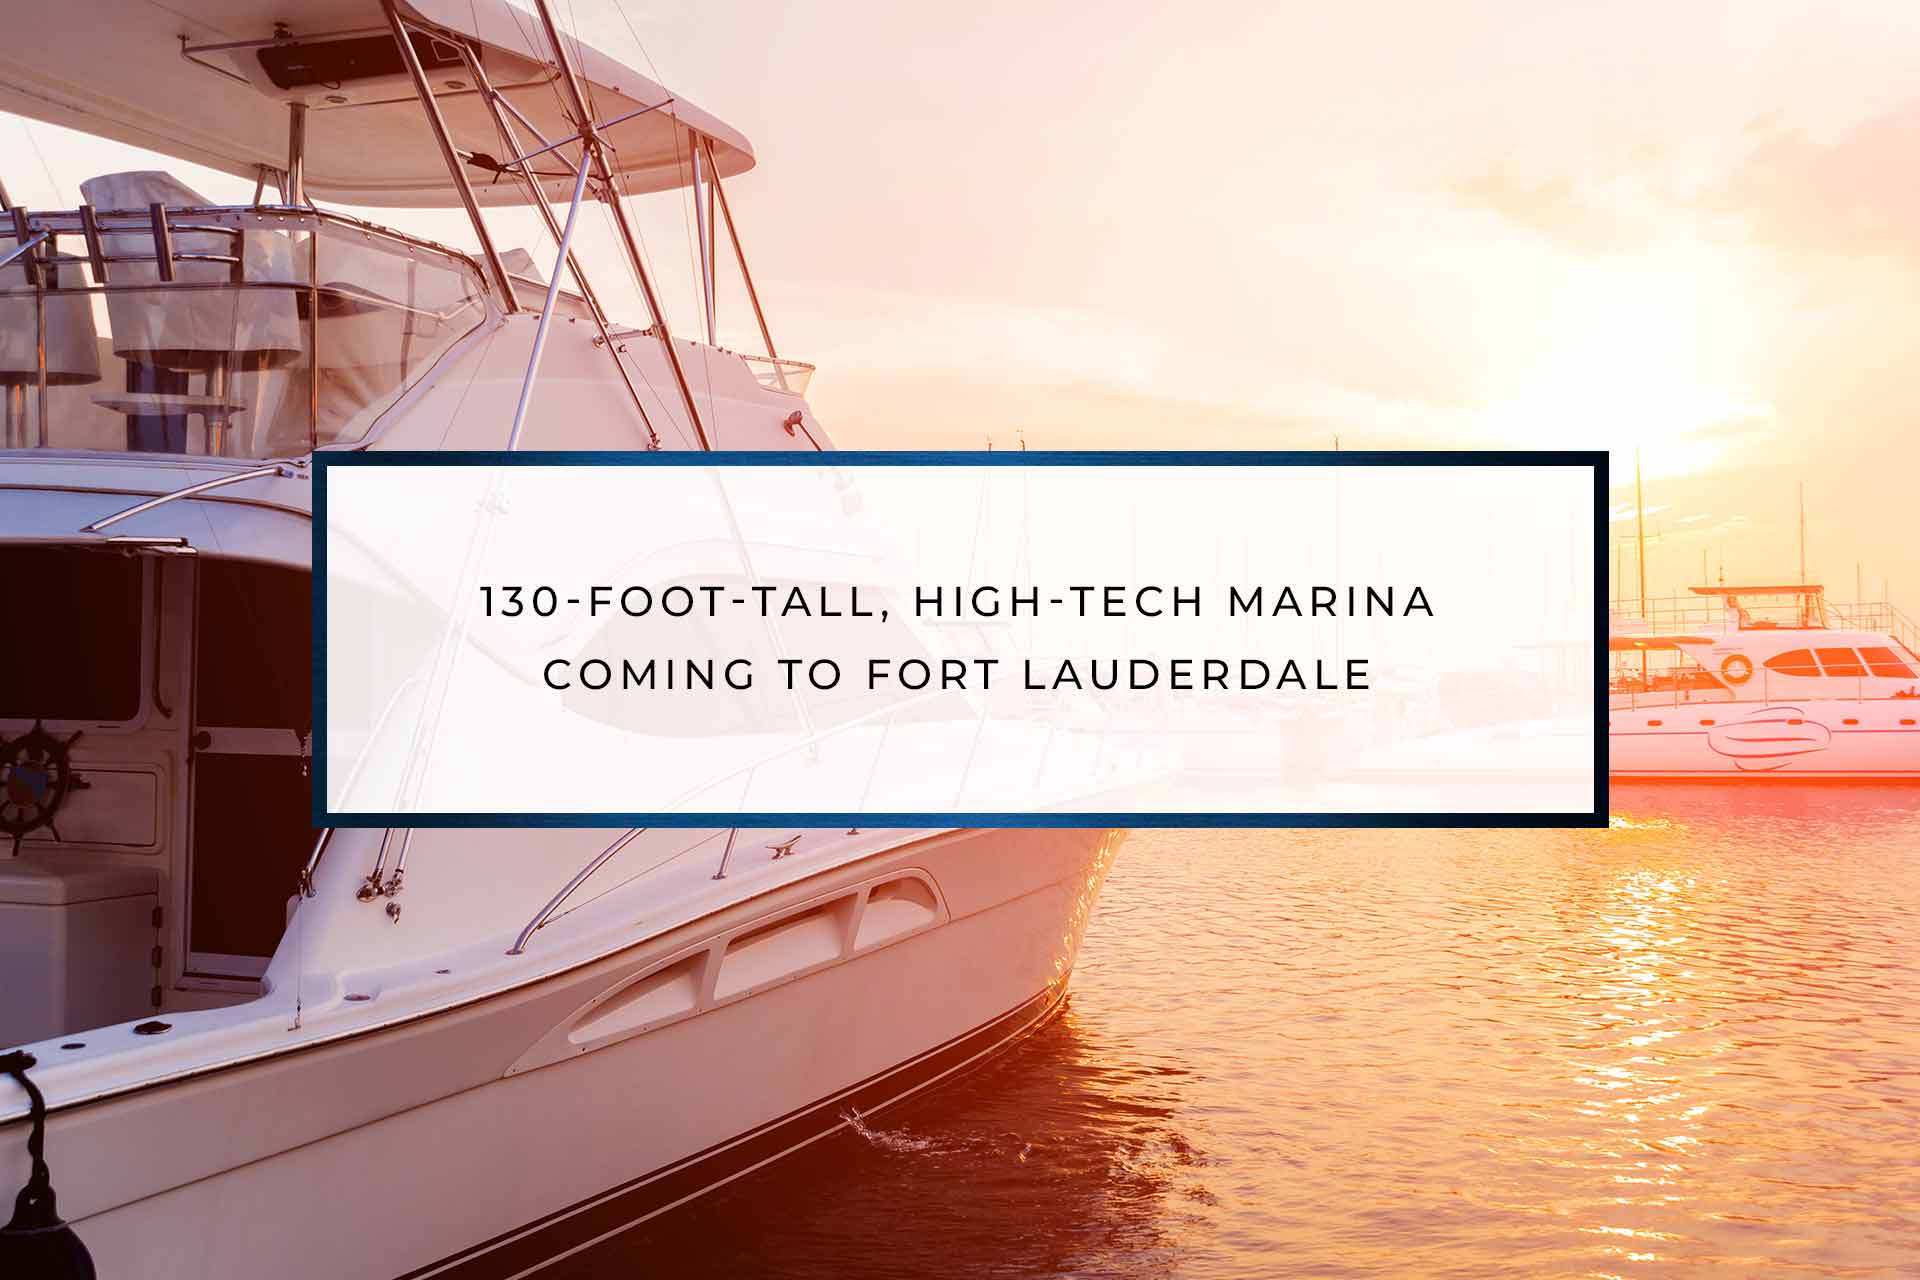 130-Foot-Tall, High-Tech Marina Coming To Fort Lauderdale